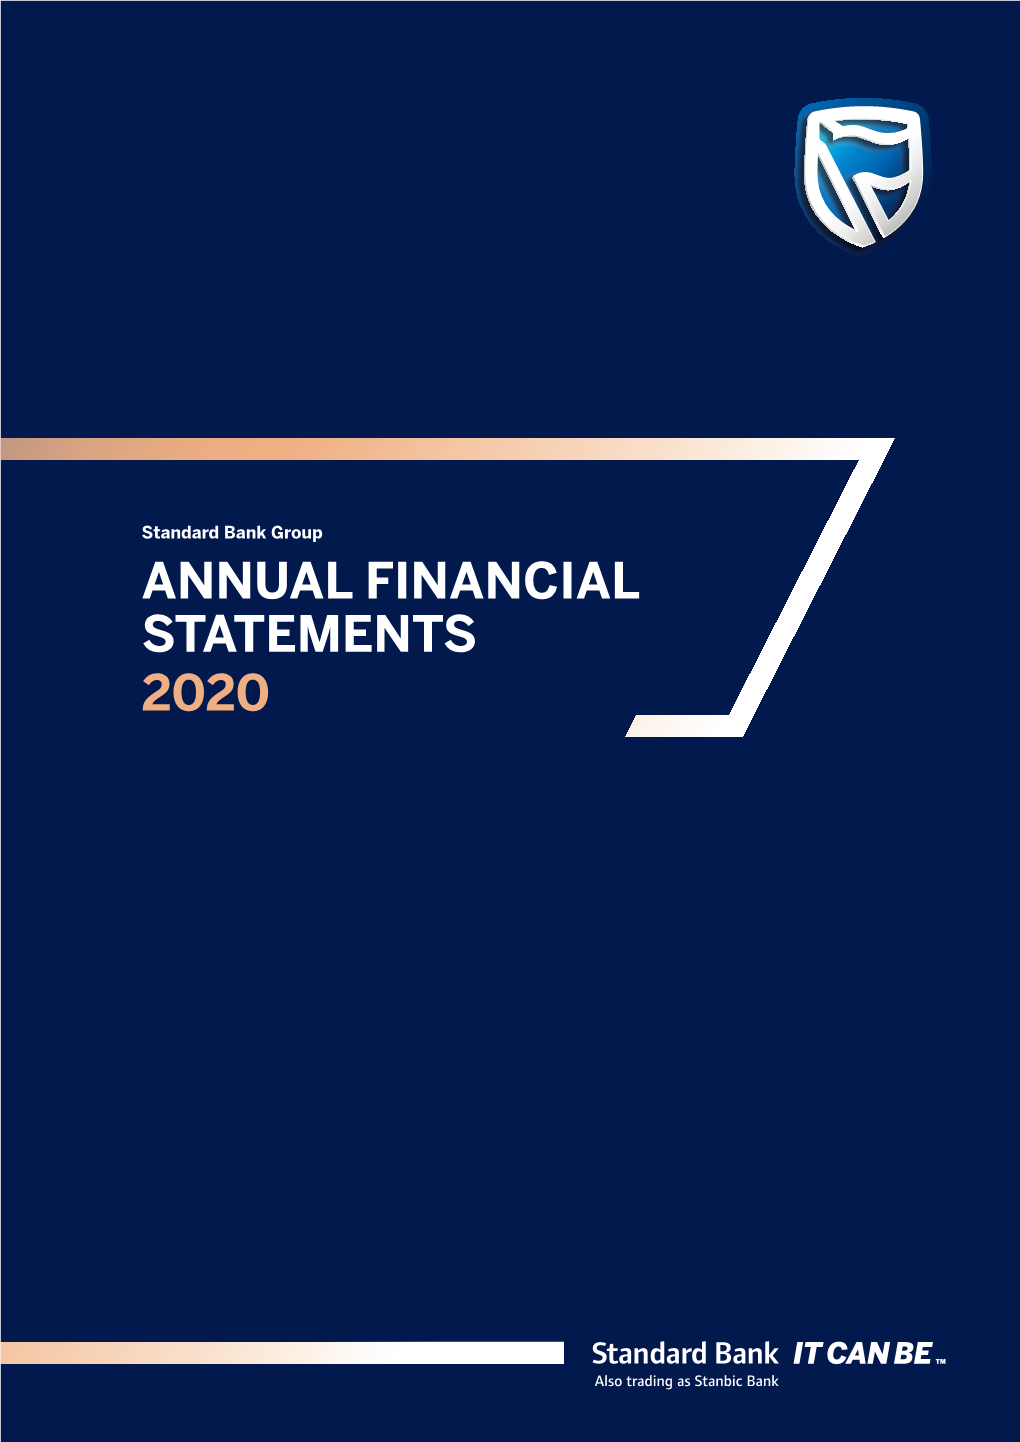 ANNUAL FINANCIAL STATEMENTS 2020 Our Reporting Suite